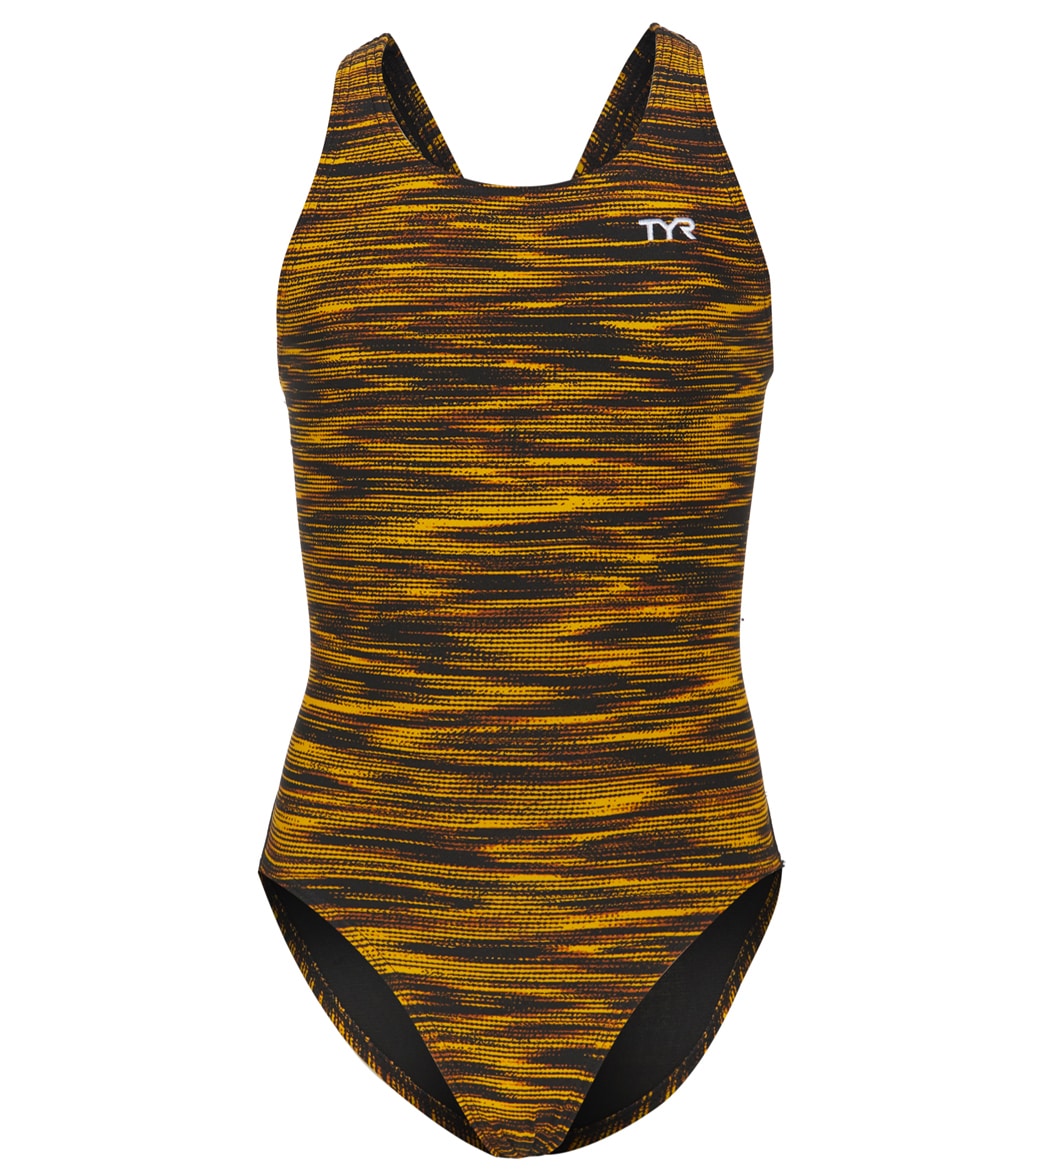 TYR Girls' Fizzy Maxfit One Piece Swimsuit - Black/Gold 22 - Swimoutlet.com